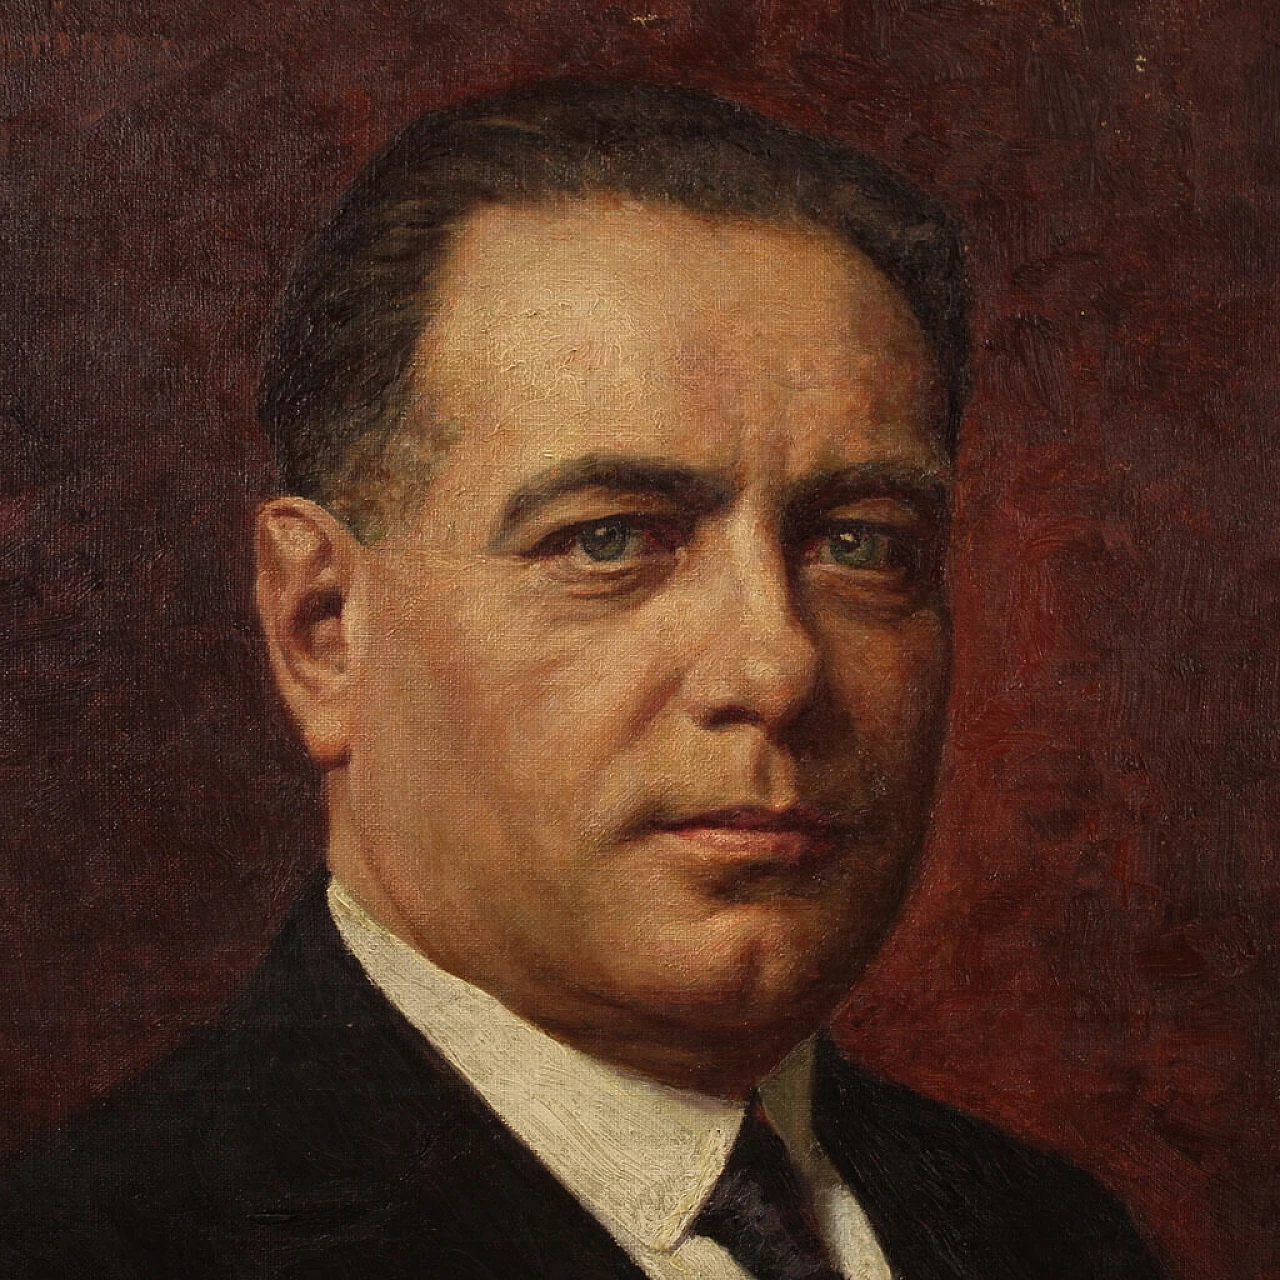 Angelo Garino, male portrait, oil painting on canvas, 1931 15